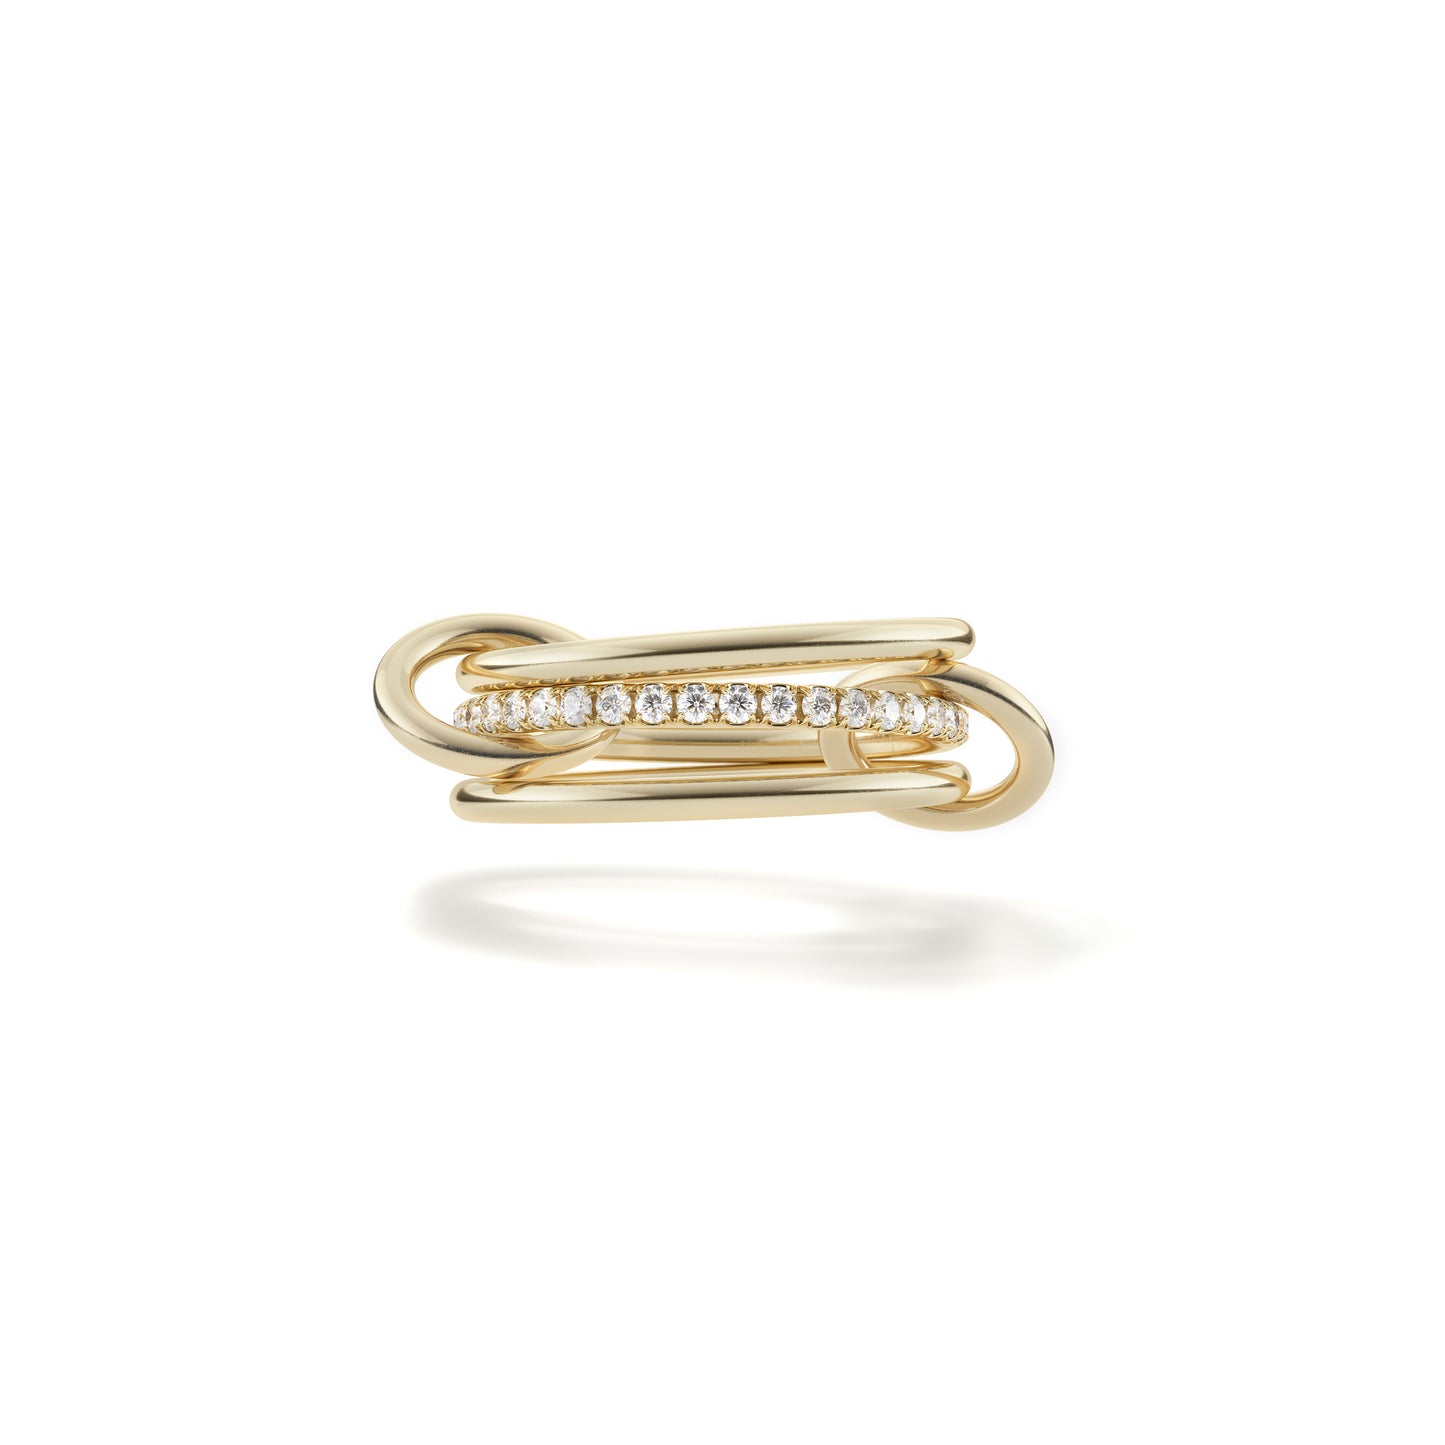 Sonny 18k Yellow Gold Band Ring